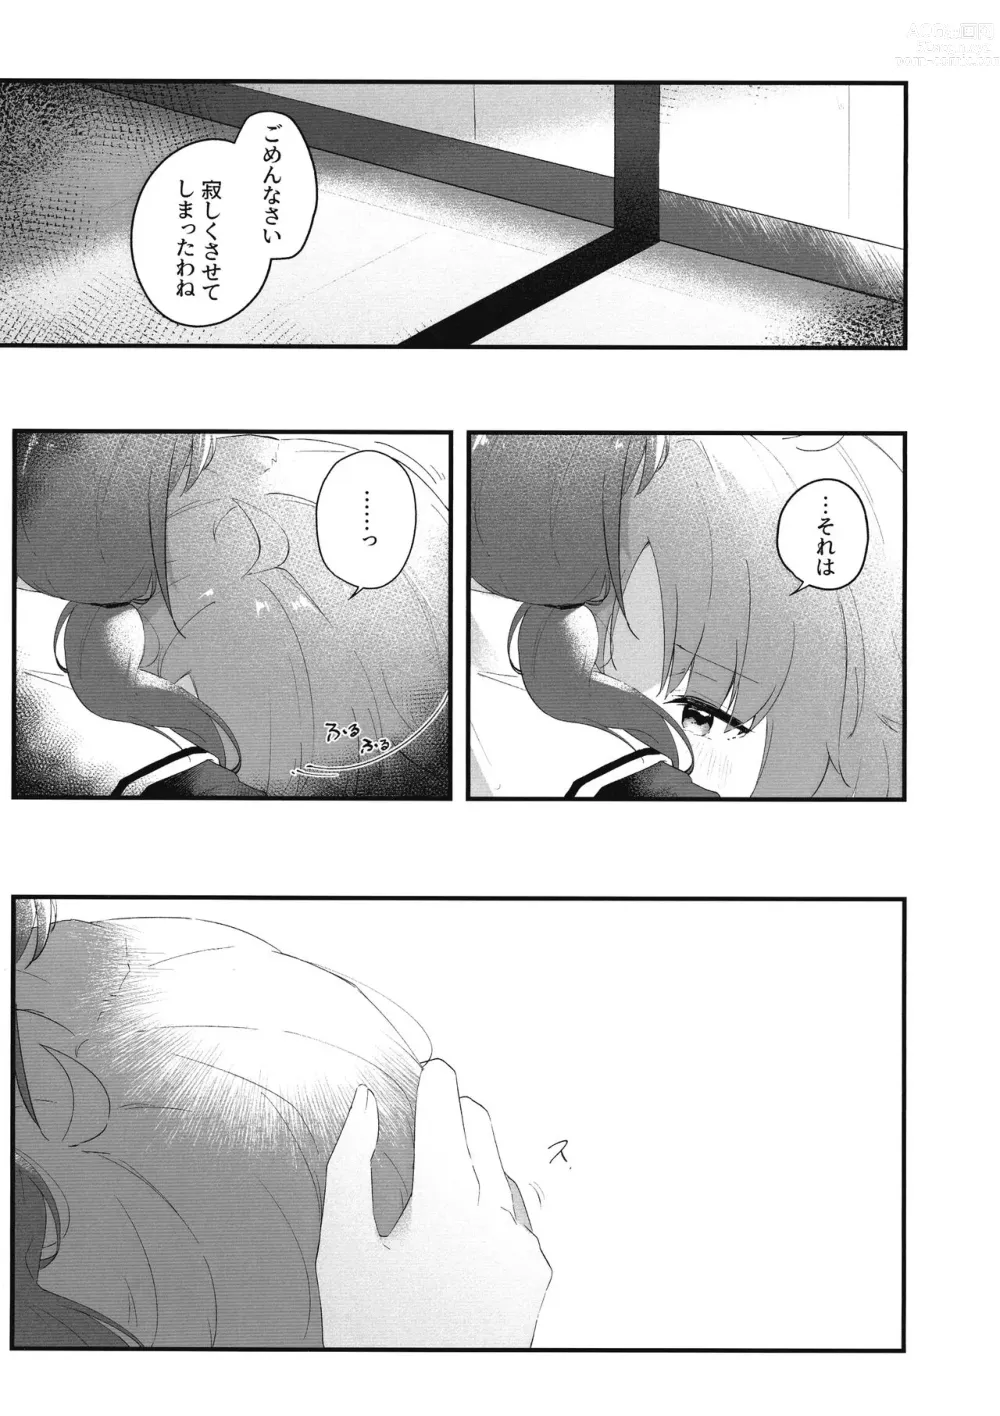 Page 4 of doujinshi Mabataki - without blink, could not find it